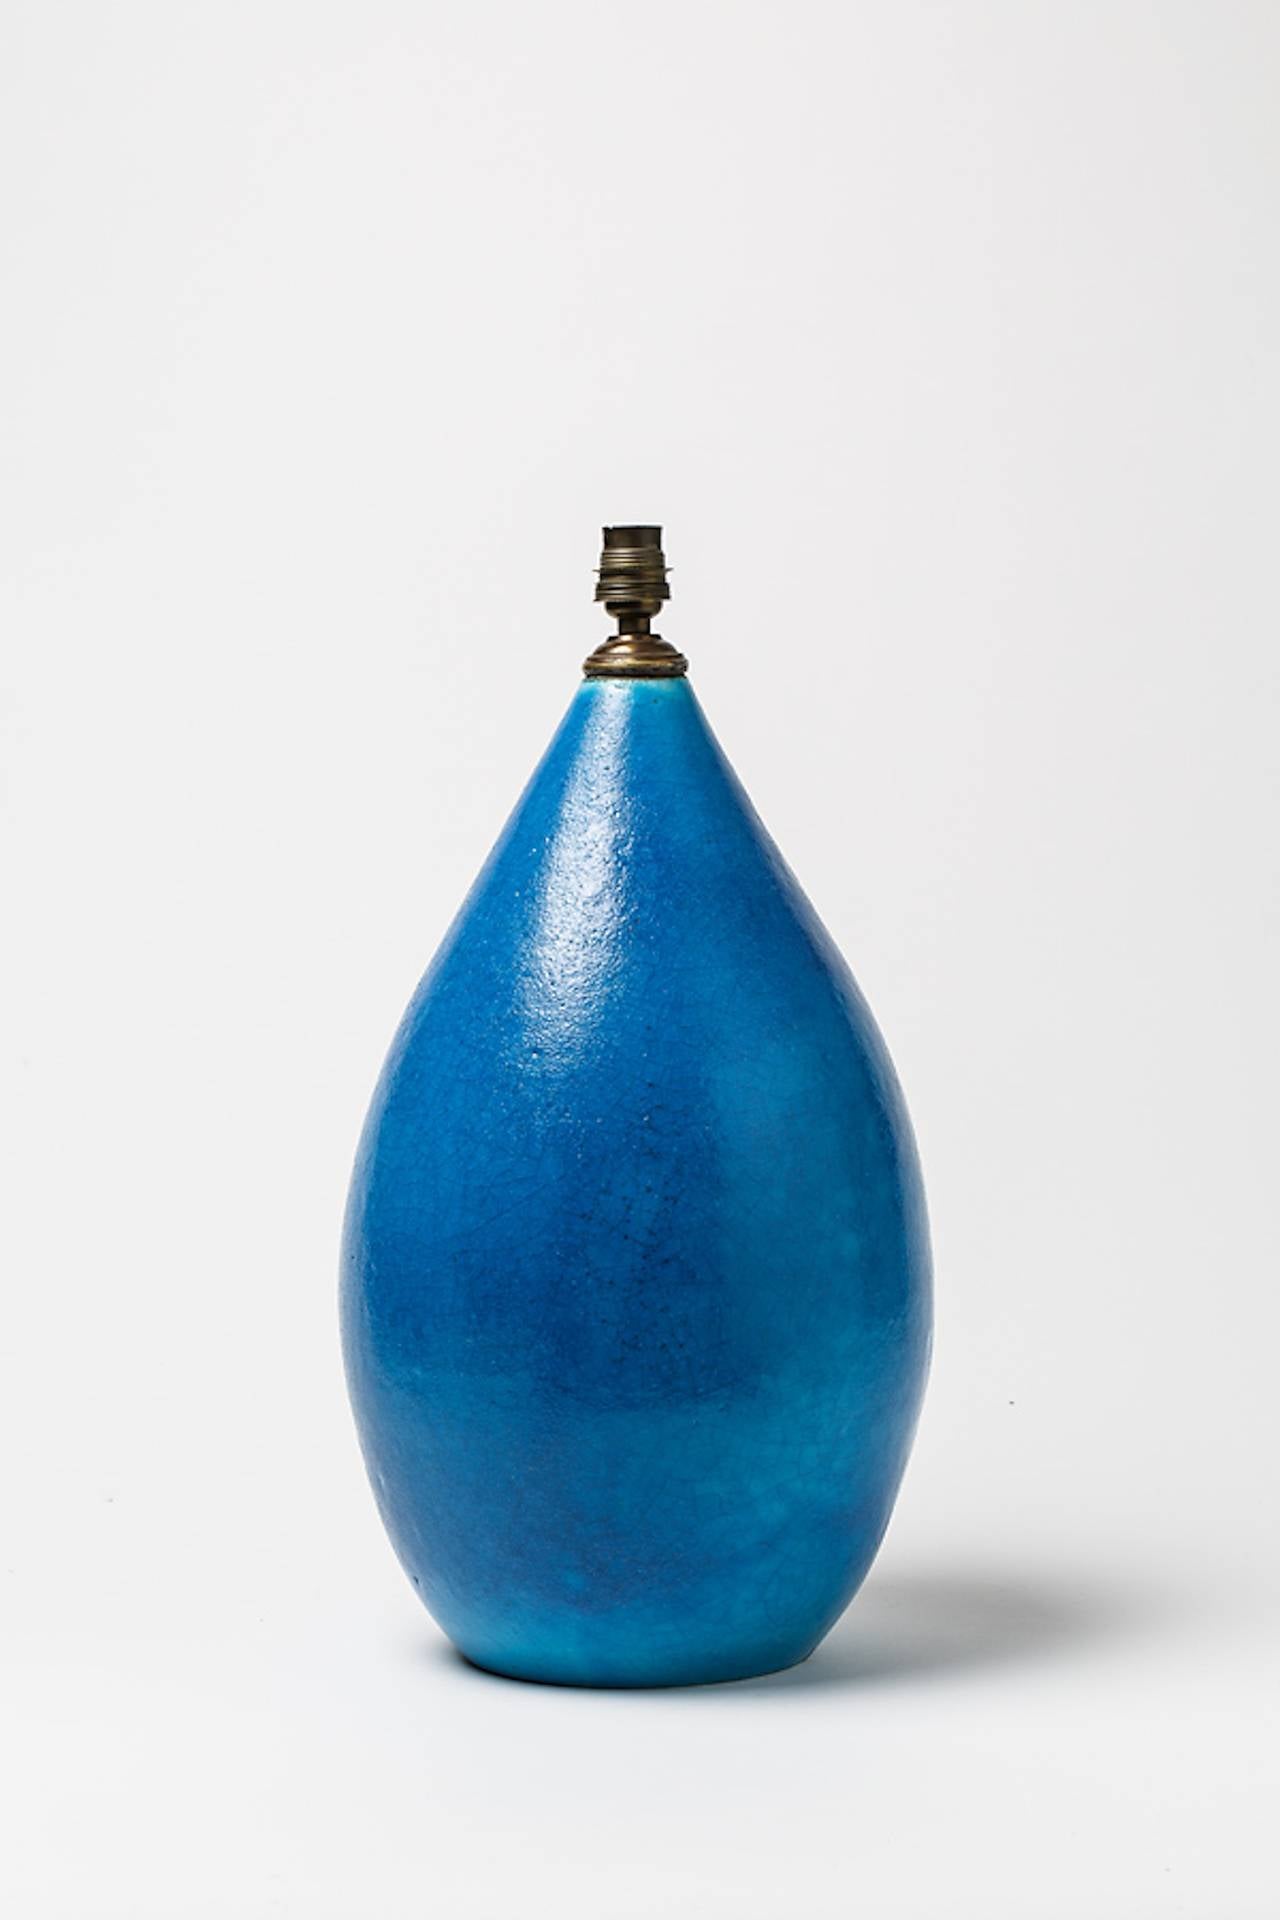 French Blue Ceramic Lamp by Raoul Lachenal, circa 1930-1940